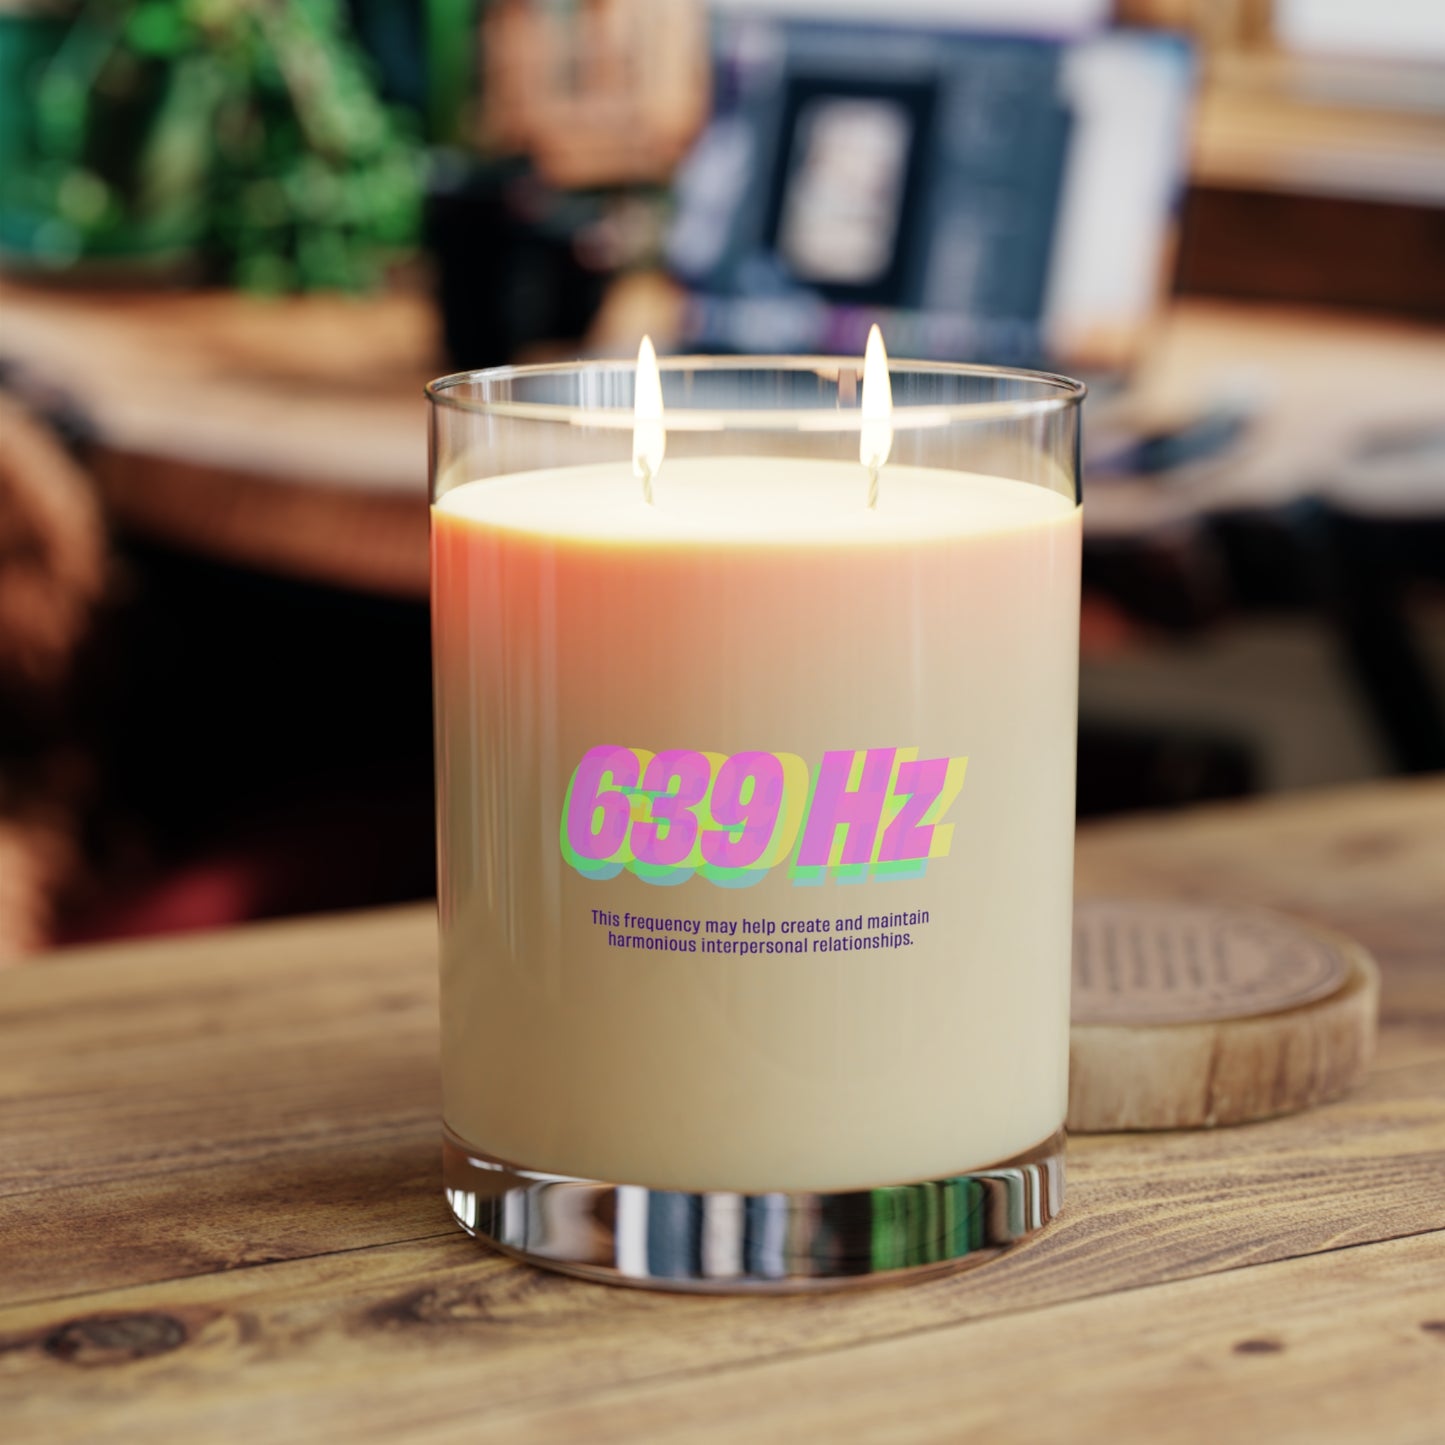 639 Hz Frequency Scented Candle